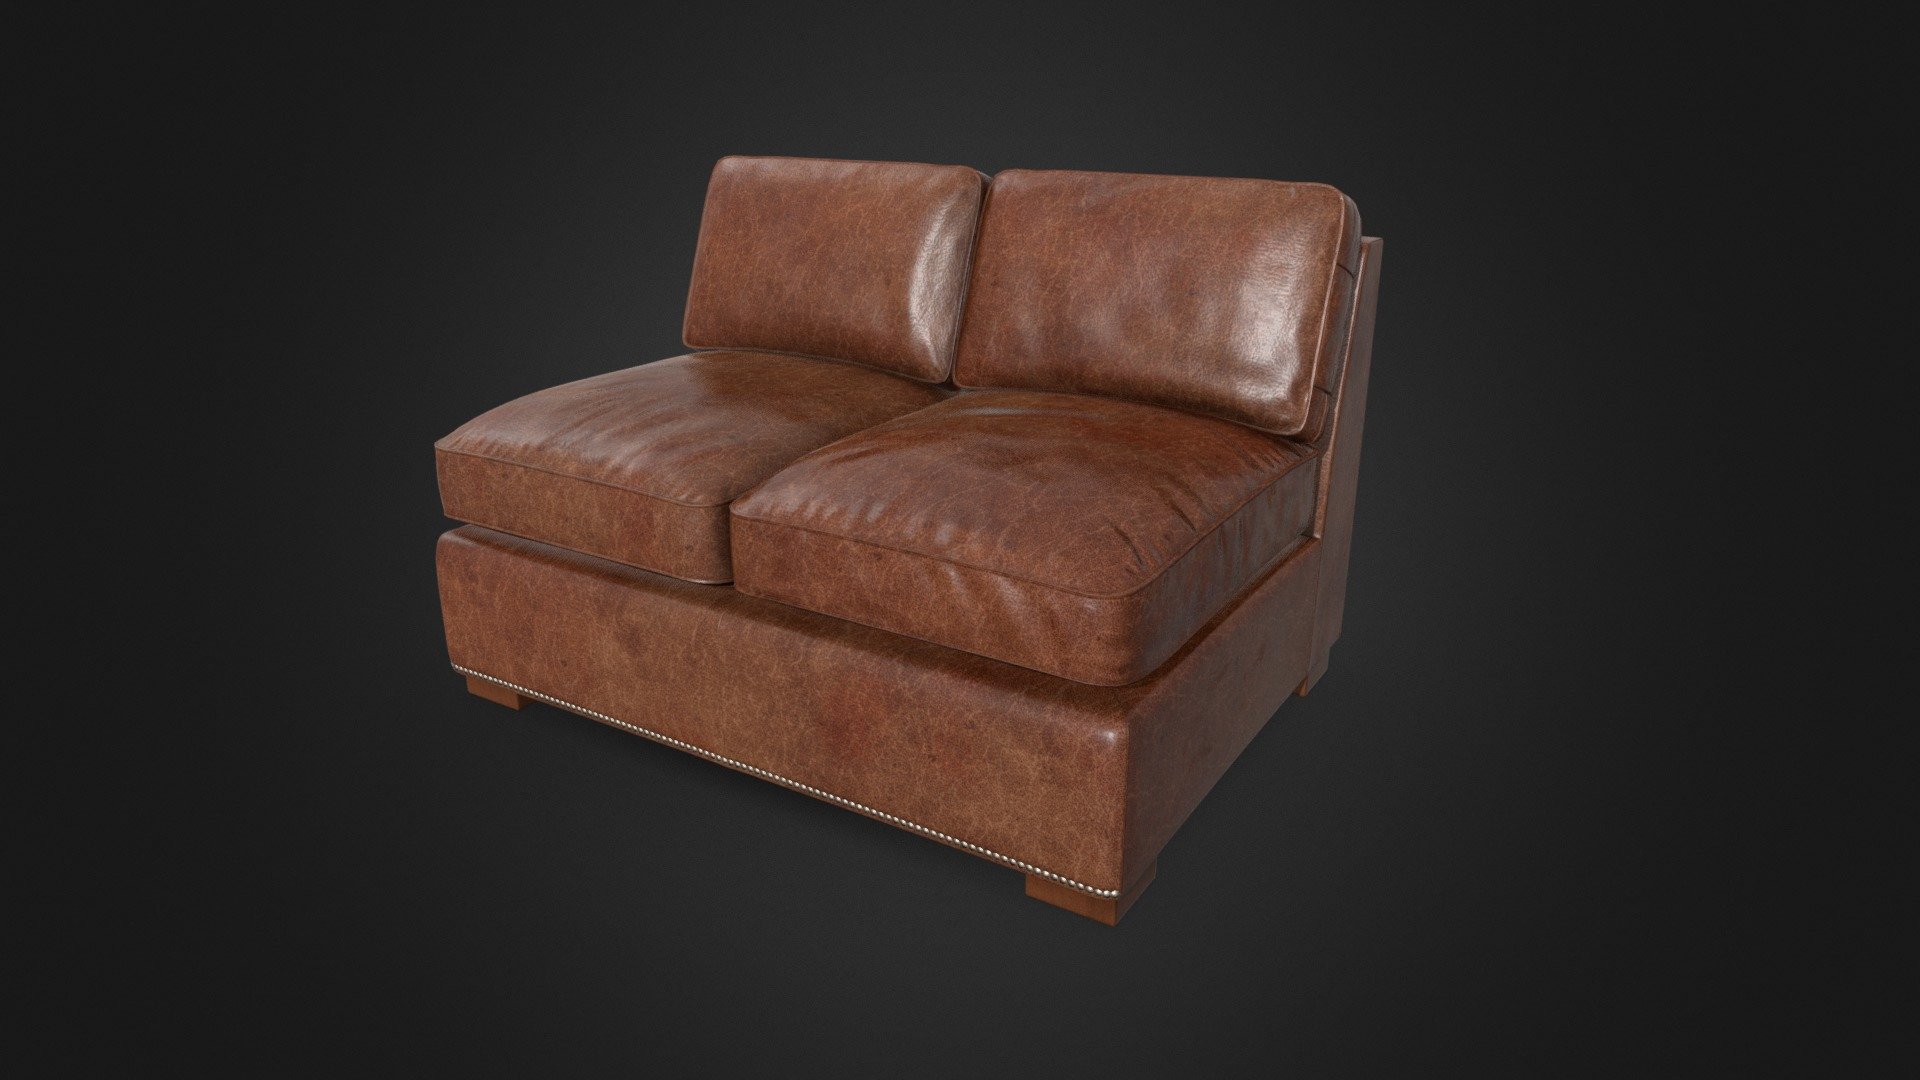 Contemporary yet reminiscent of the geometric silhouette Deco design. The amply padded cushions offer sink-in comfort,
all swaddled in rich aniline-dyed leather.

TEXTURES




Albedo

Normal

Specular

Glossiness

4096x4096 high resolution texture sets are made according to the working process PBR 3d model